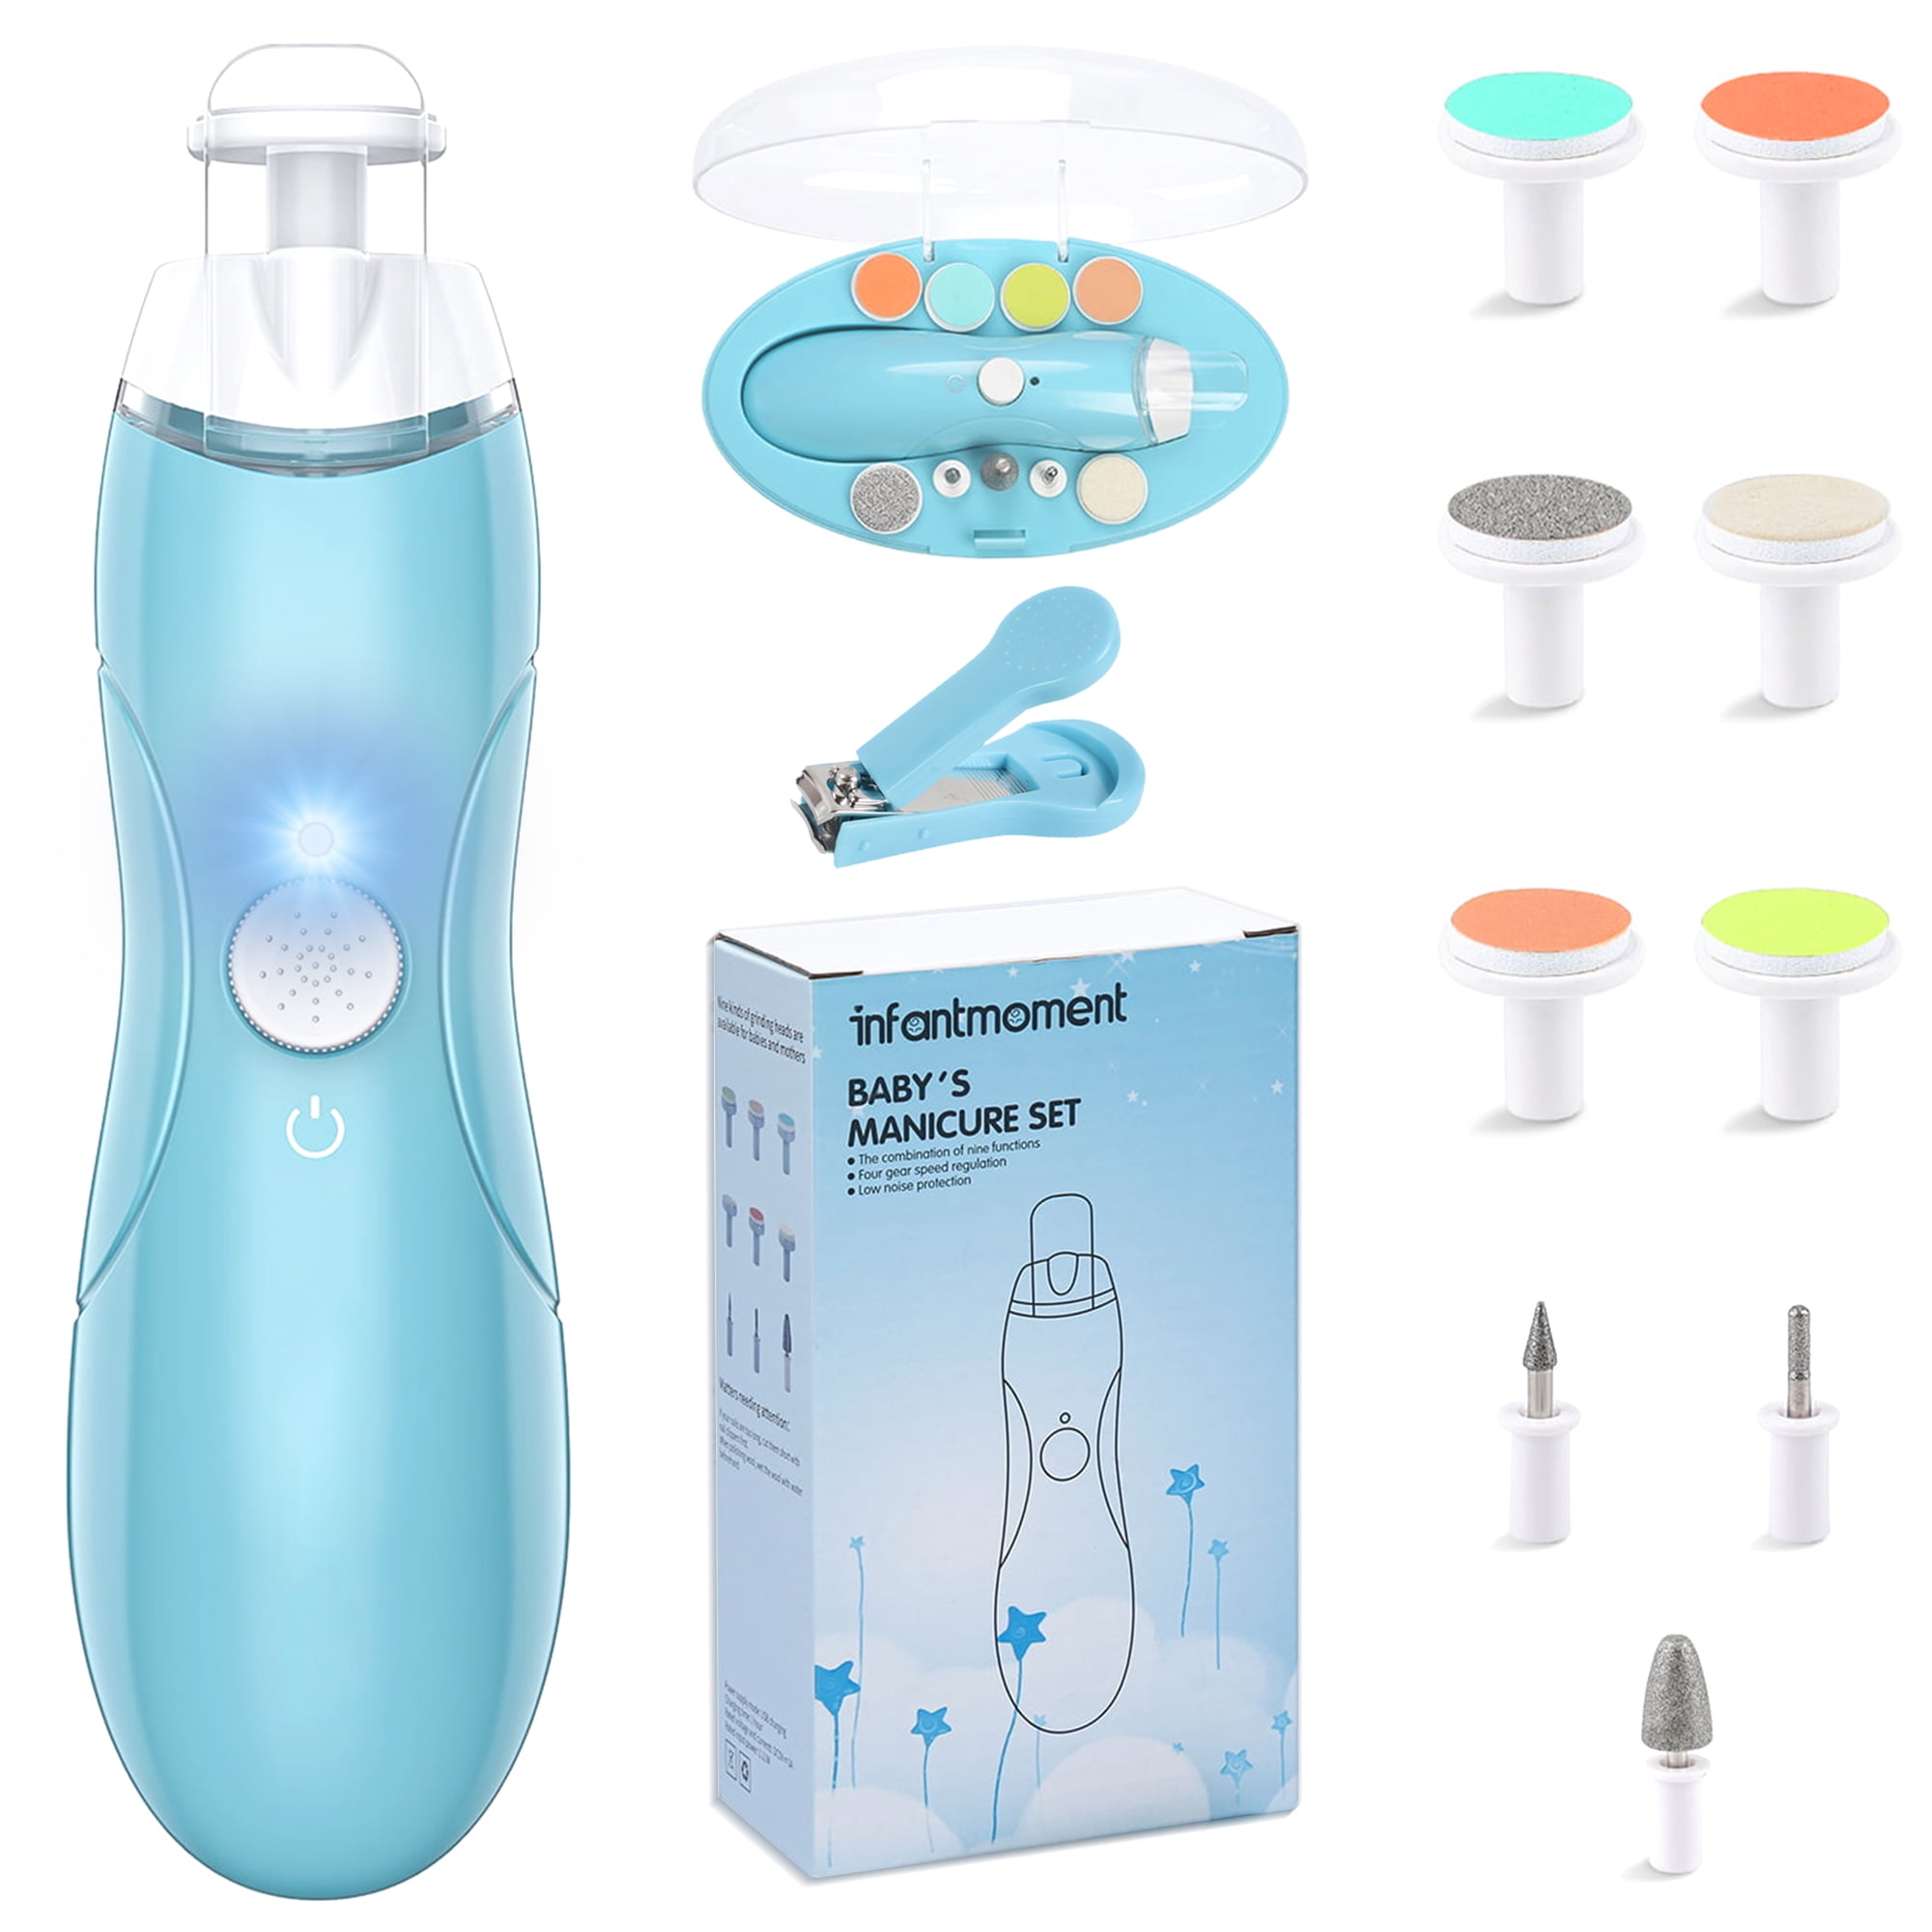 Charging Baby Nail Trimmer Electric File Clippers LED light 9 Grinding Heads 9 1 Safe Trimmer Kit Additional Replacement Heads Blue faa26146 88c9 4ec3 b1f0 dcb2ef3d3e5b.3886b10d9f9f1c97f59a1dfa16967ff1